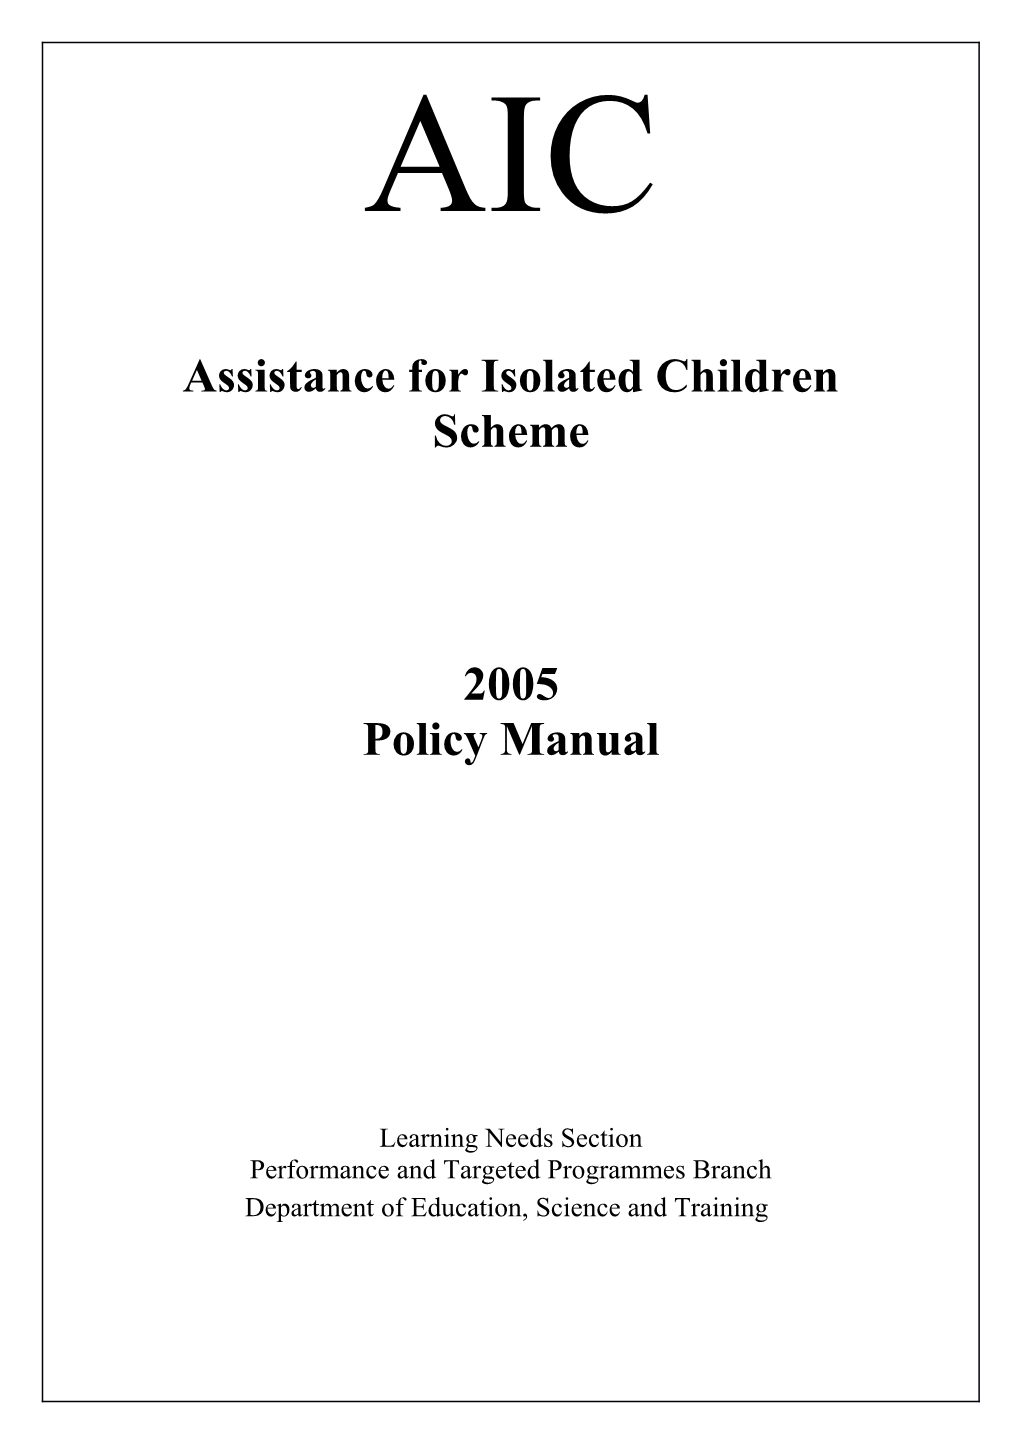 Assistance for Isolated Children